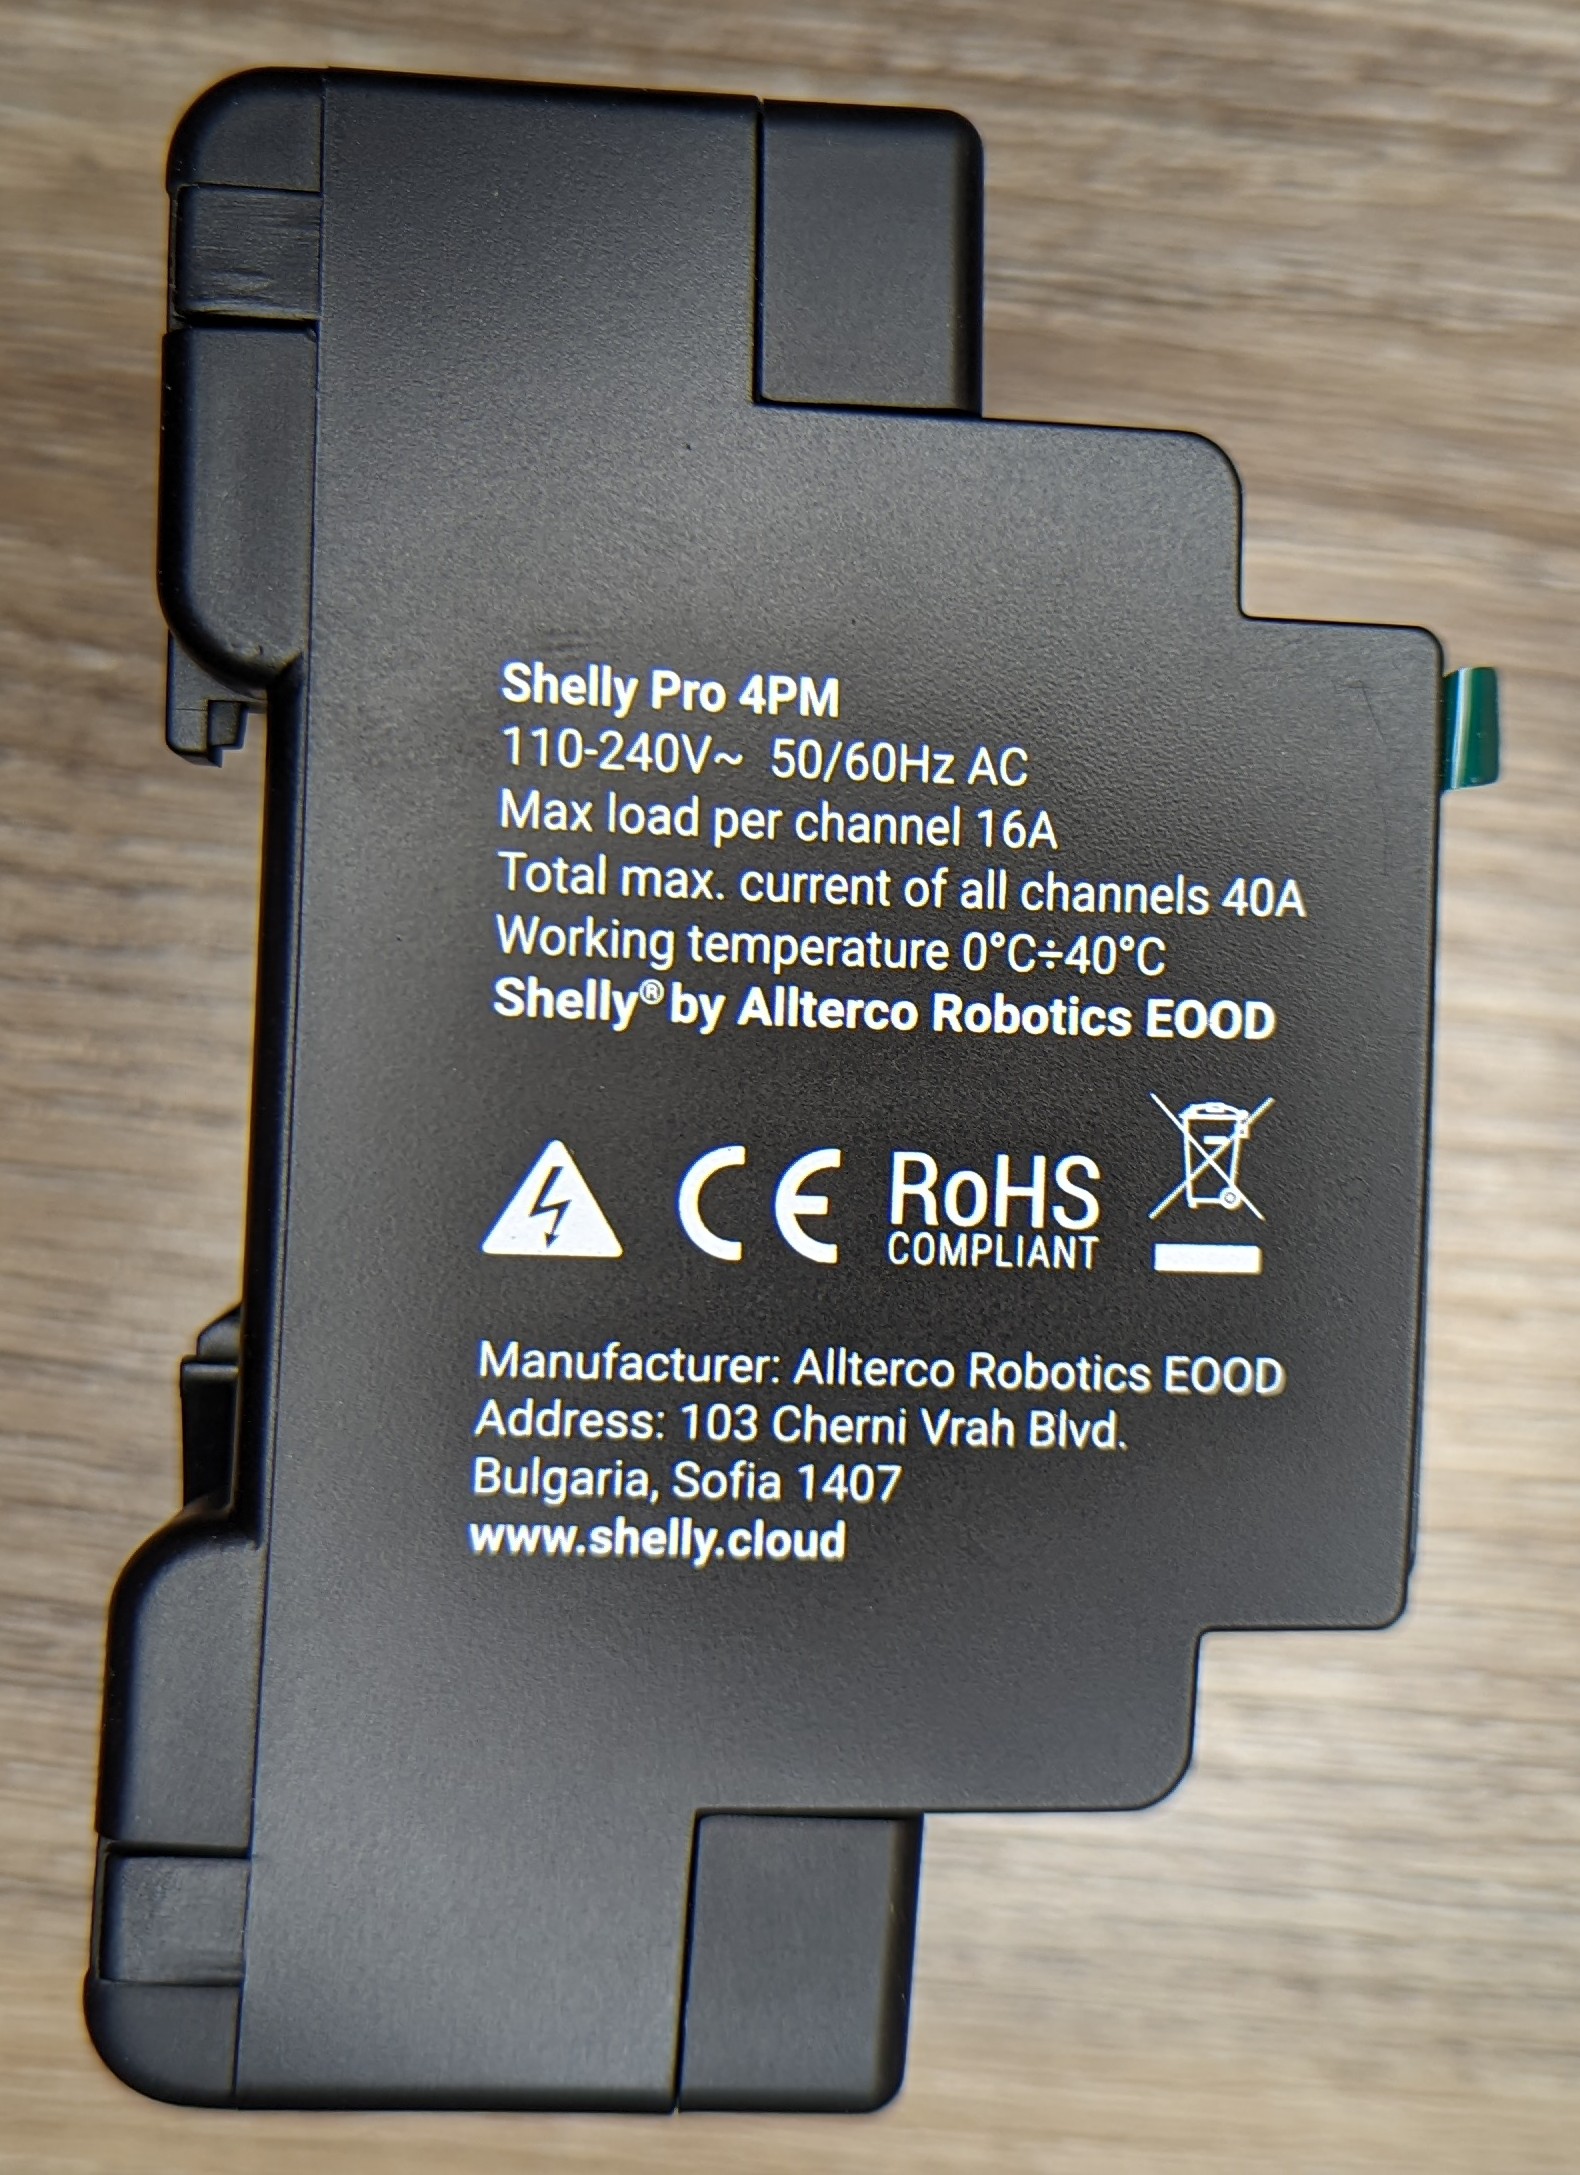 Picture showing the product information printed on the side of the Shelly device